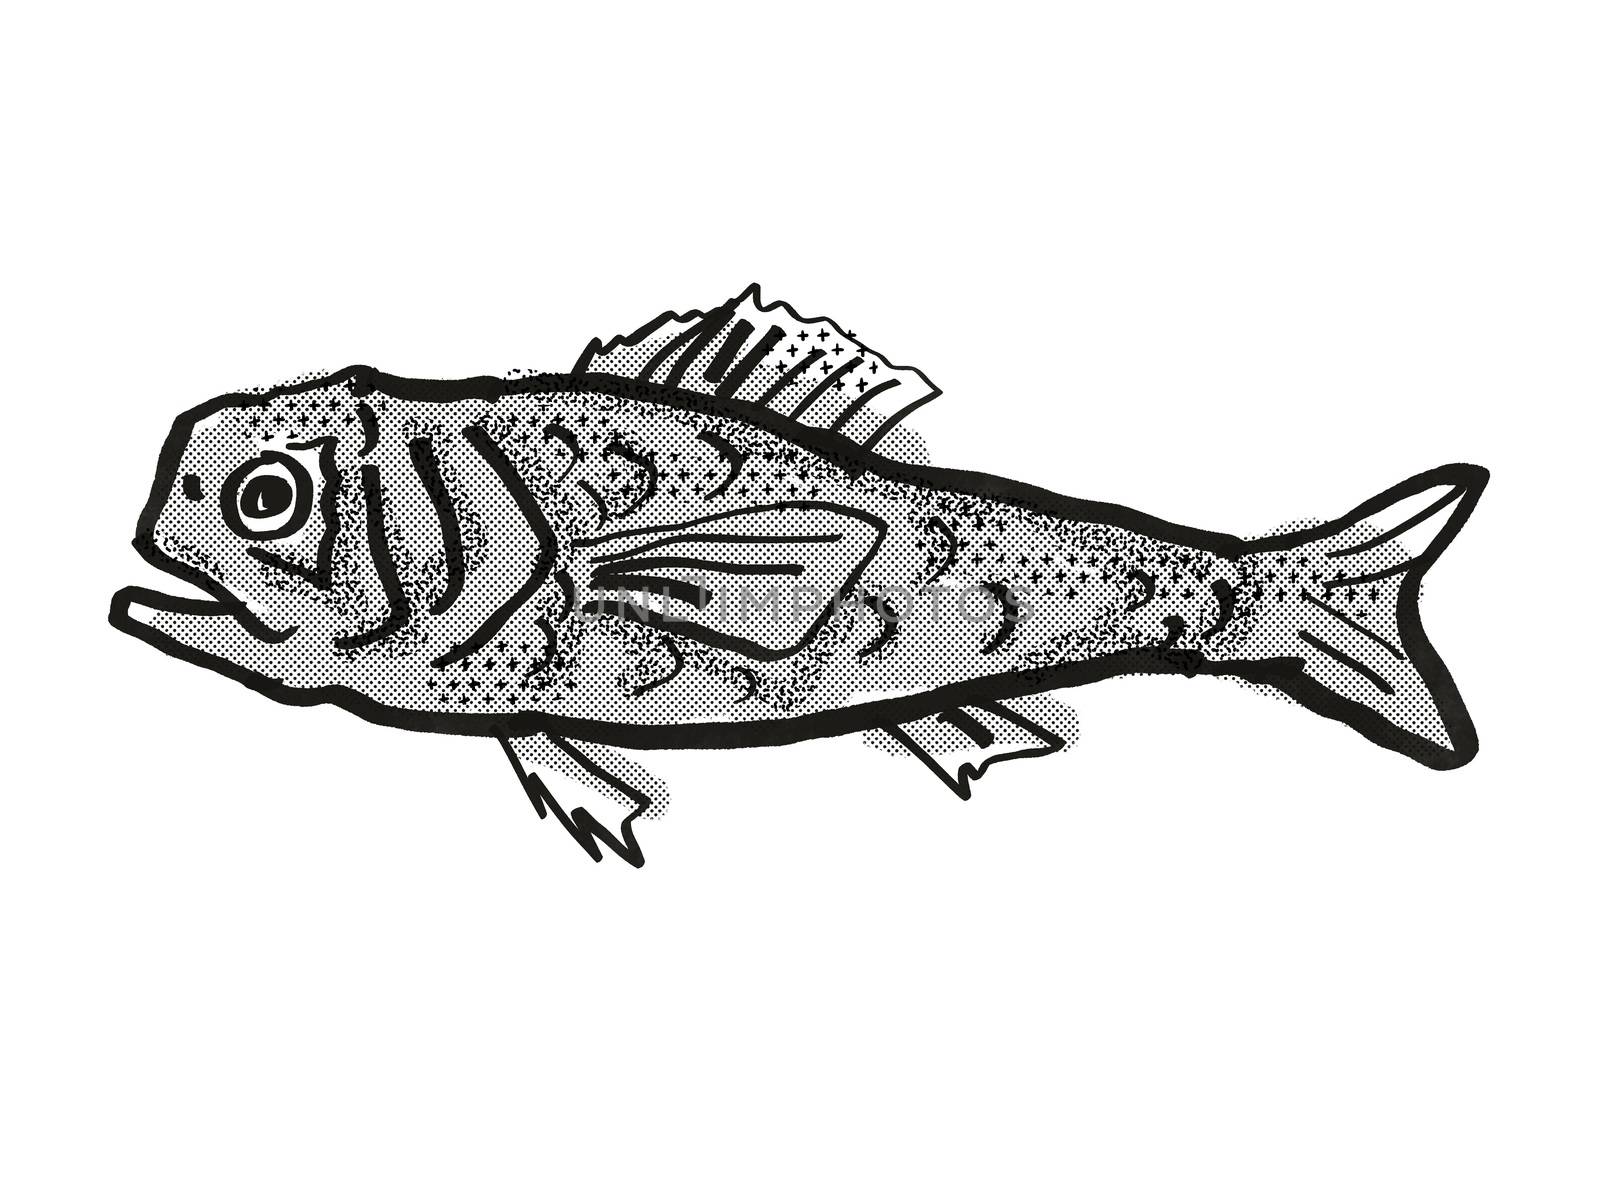 Retro cartoon style drawing of a Shoulderspine Bigscale fish  , a native Australian marine life species viewed from side on isolated white background done in black and white.